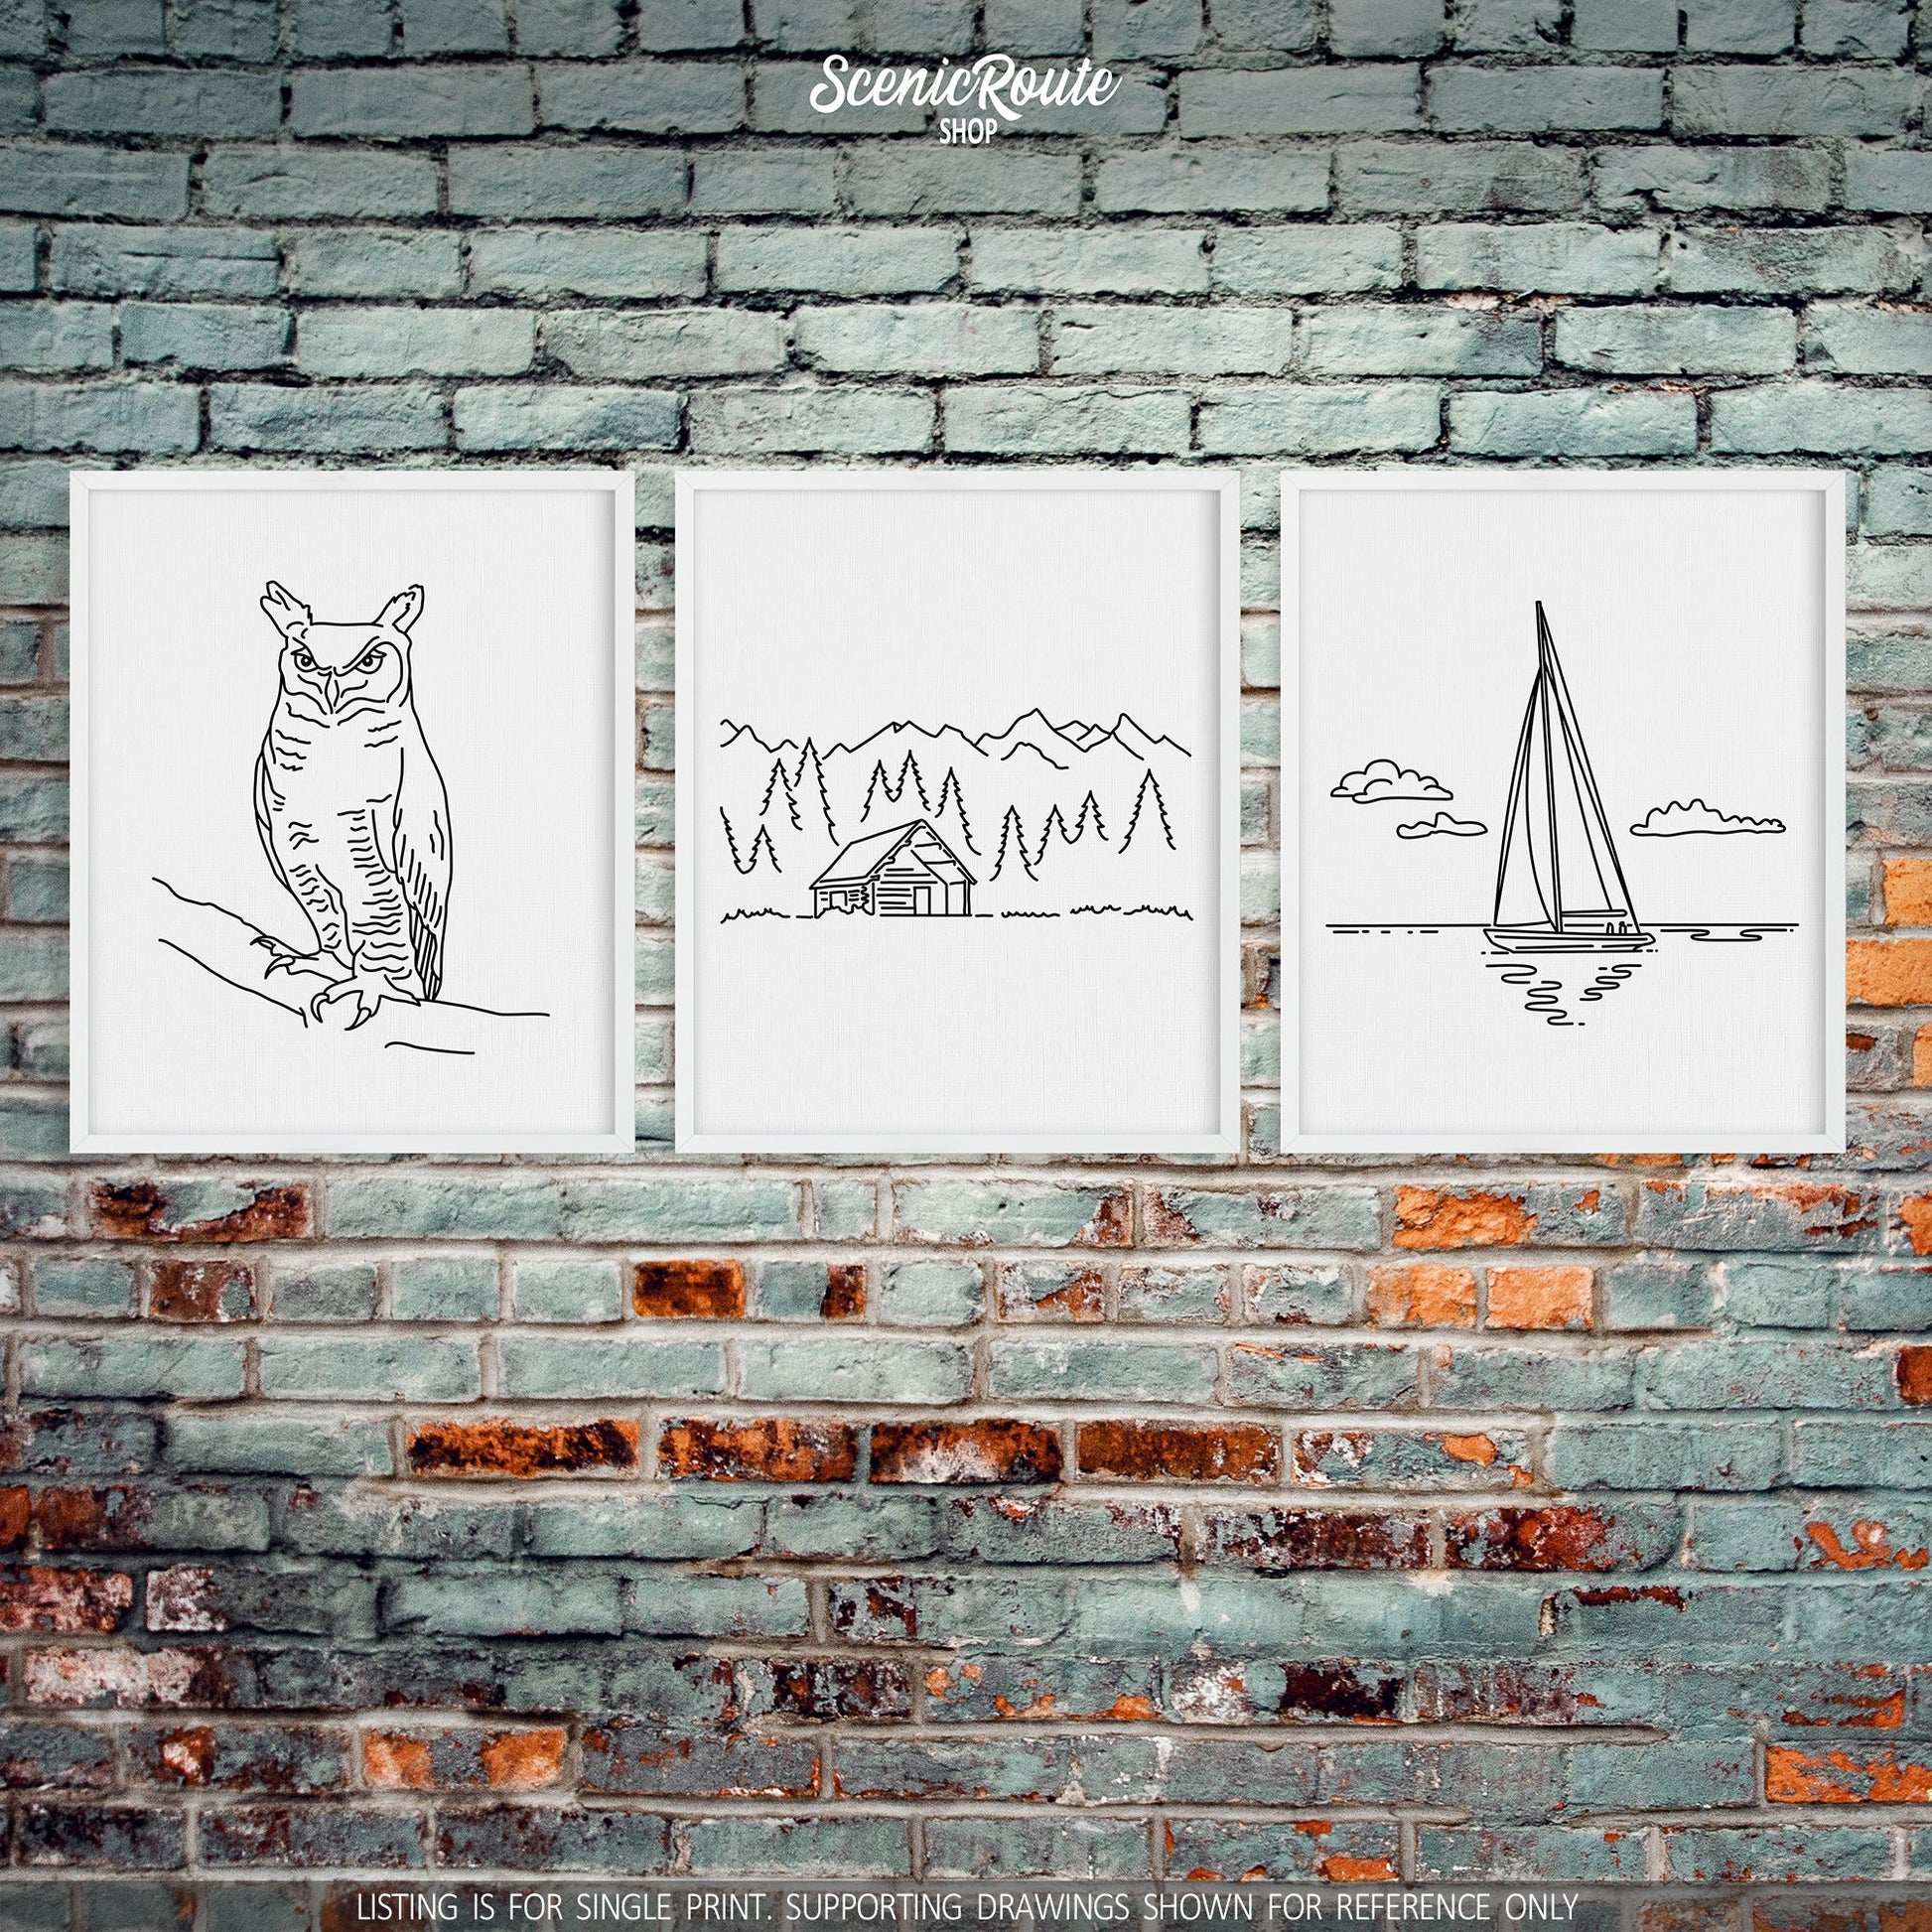 A group of three framed drawings on a brick wall. The line art drawings include an Owl, Log Cabin, and Sailing